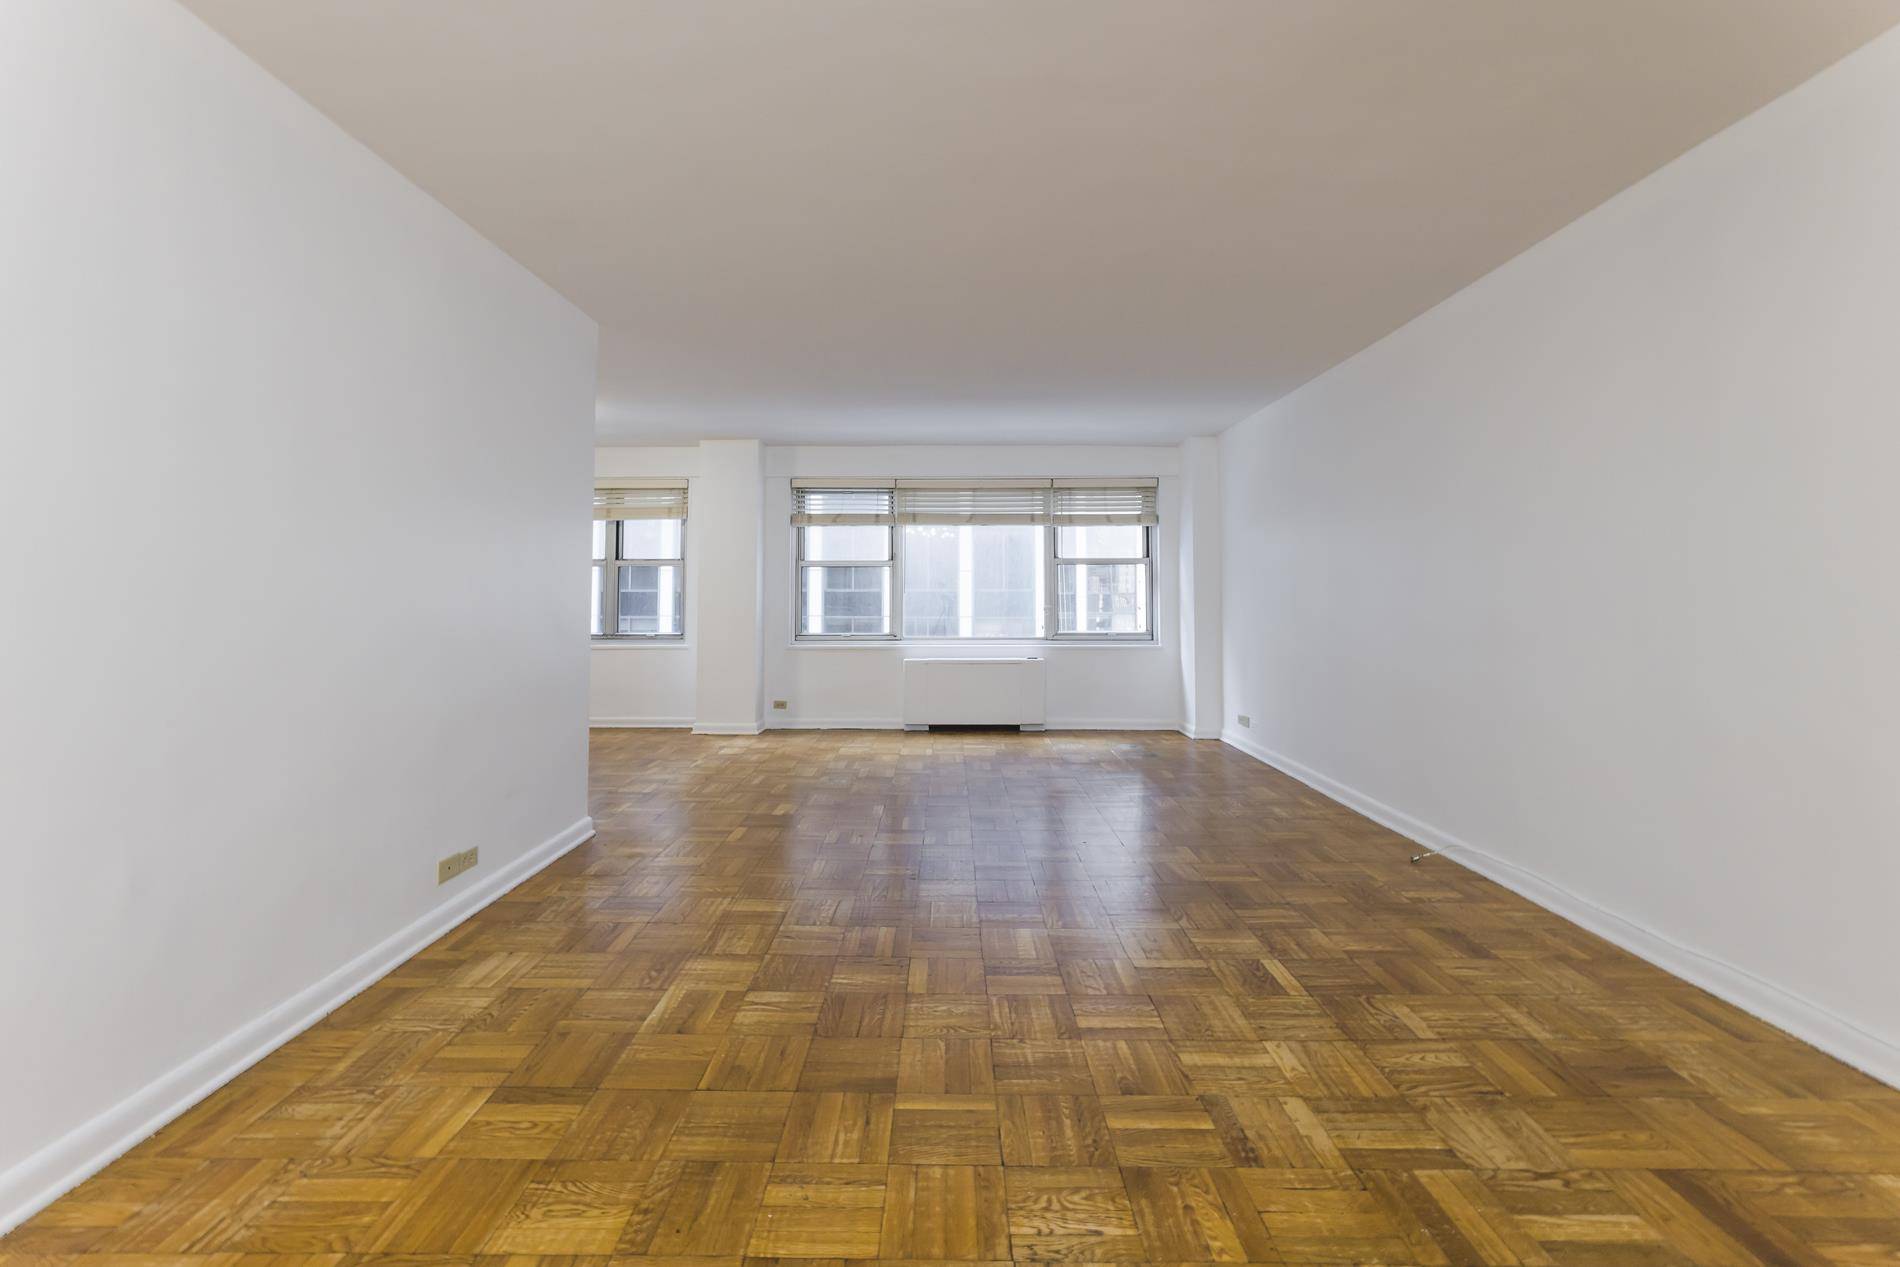 Put your finishing touches on this attractively priced alcove studio in Gallery House Condominium.